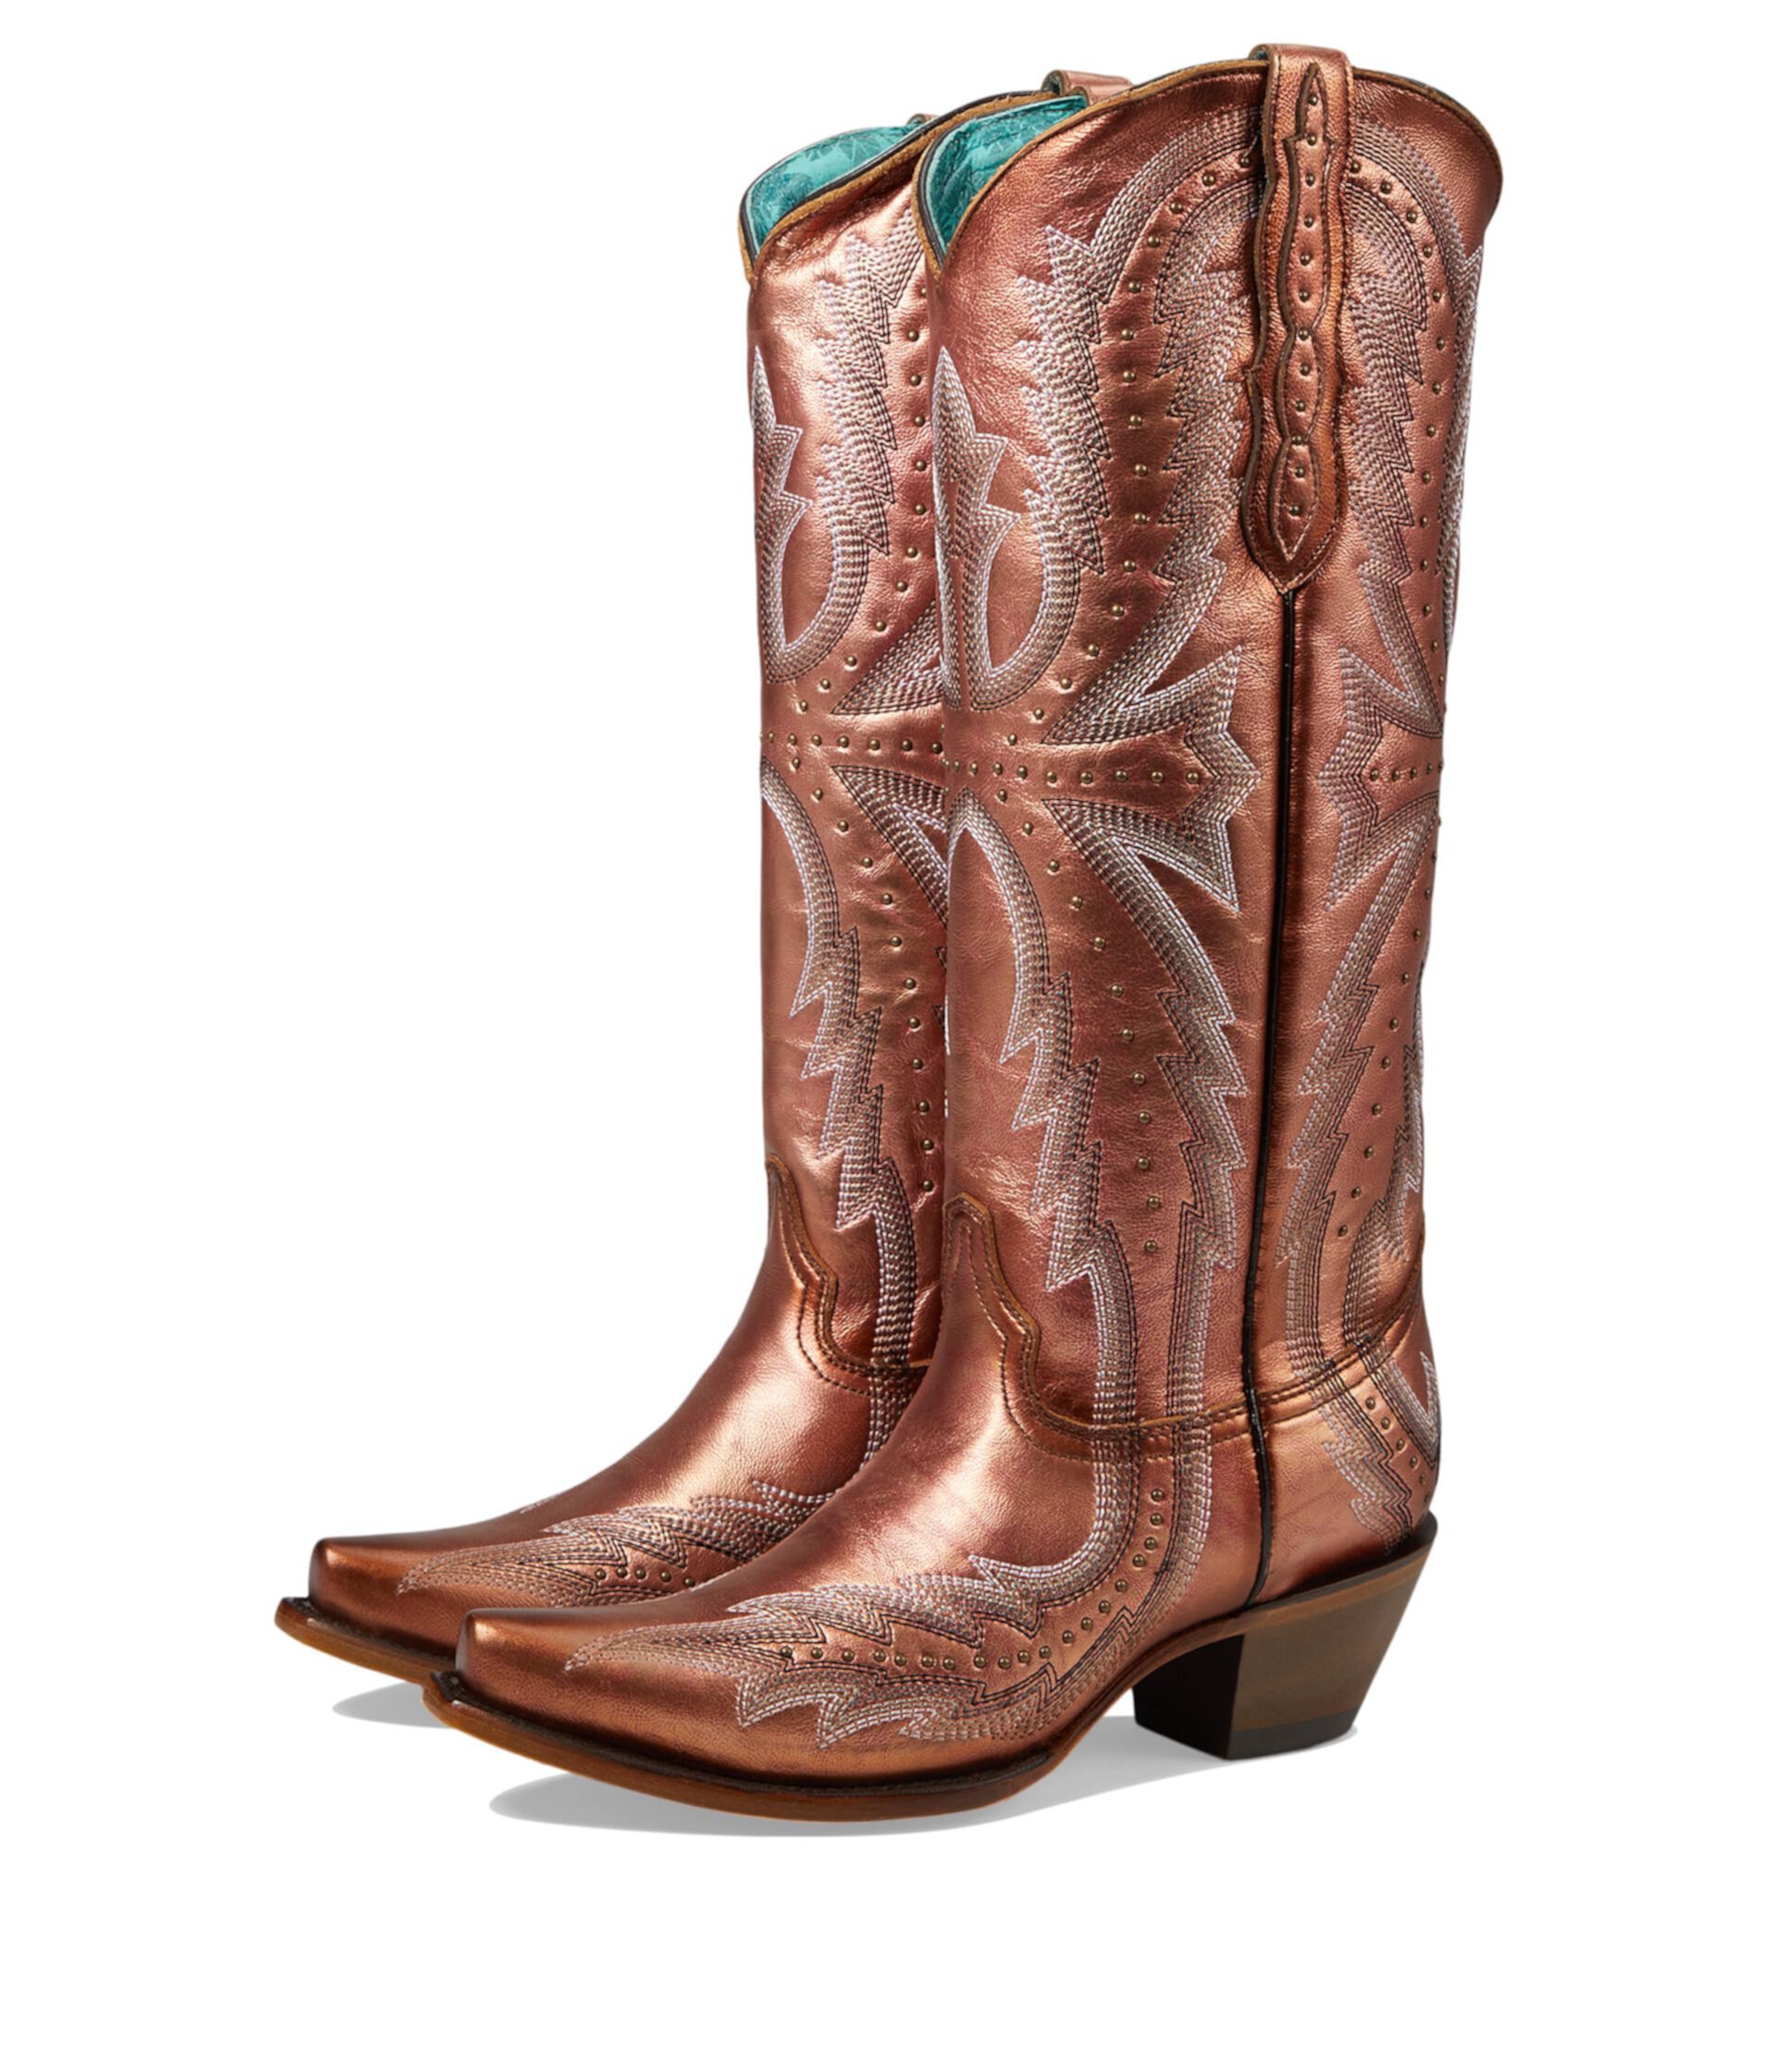 C4070 Corral Boots